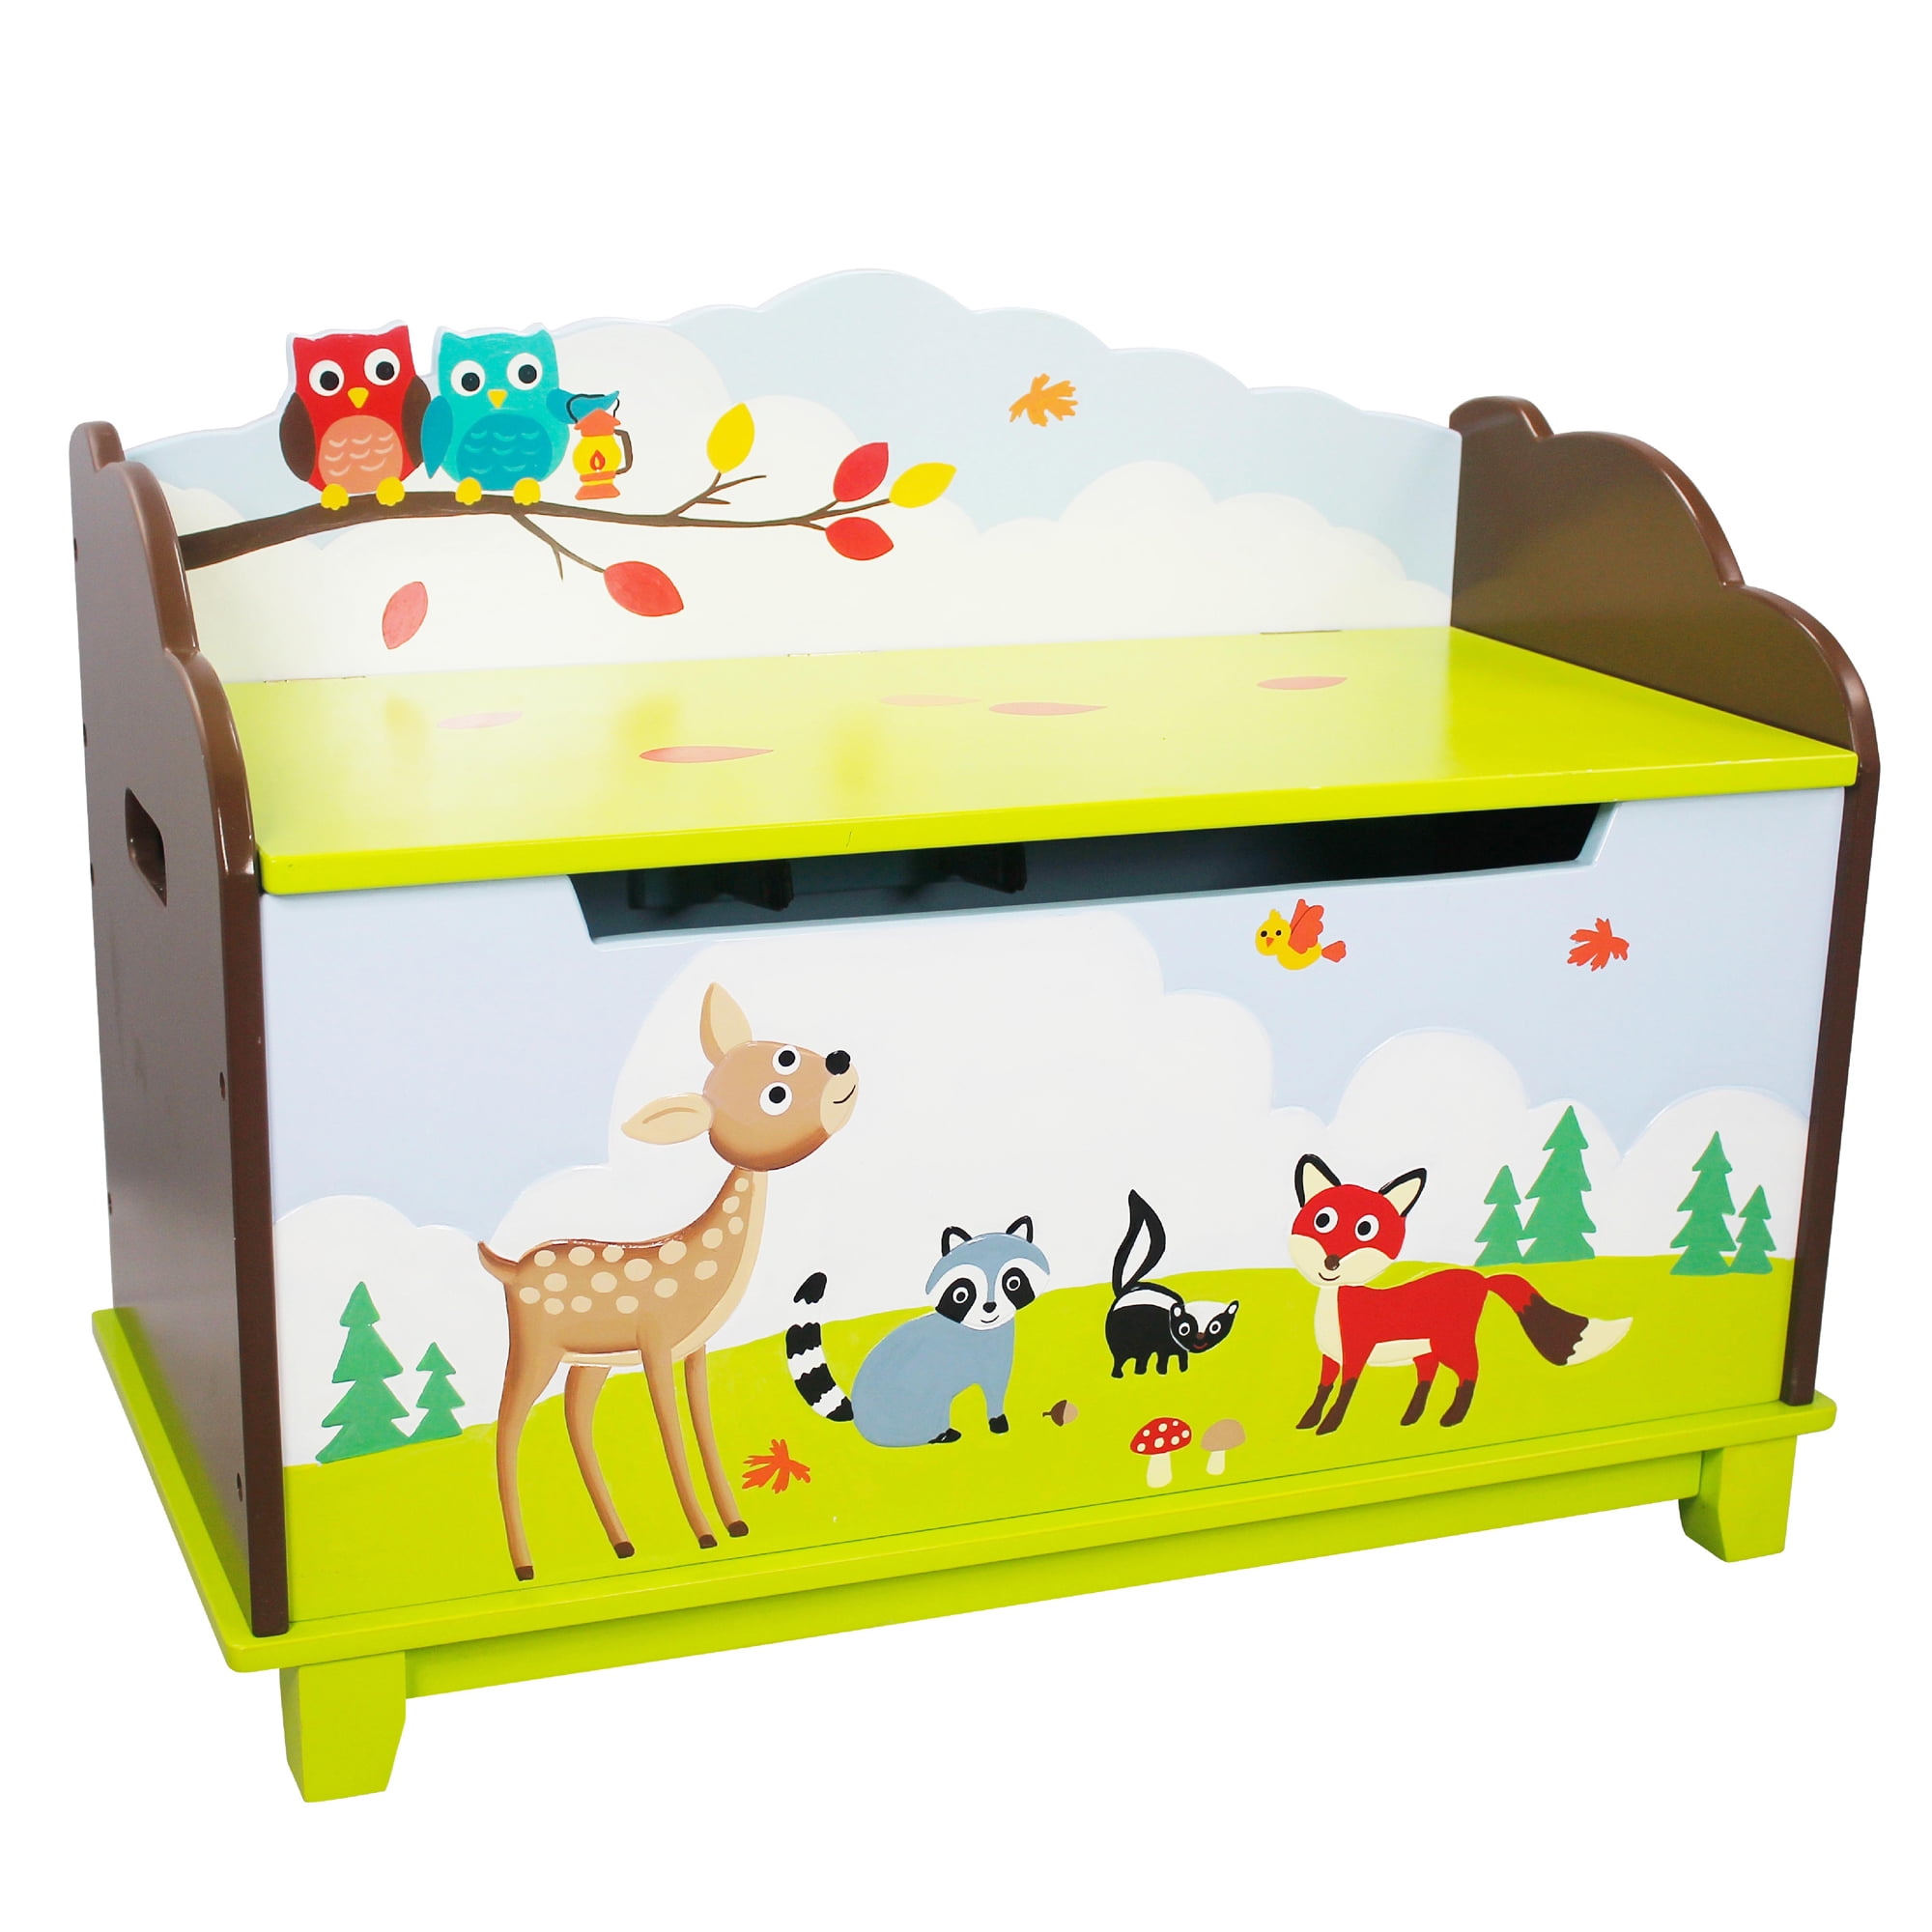 Hand Crafted & Hand Painted Storage Bench Toy Storage Unit Child Friendly Water-Based Paint Fantasy Fields Enchanted Woodland Themed Kids Wooden Toy Chest Storage Bench with Safety Hinges 